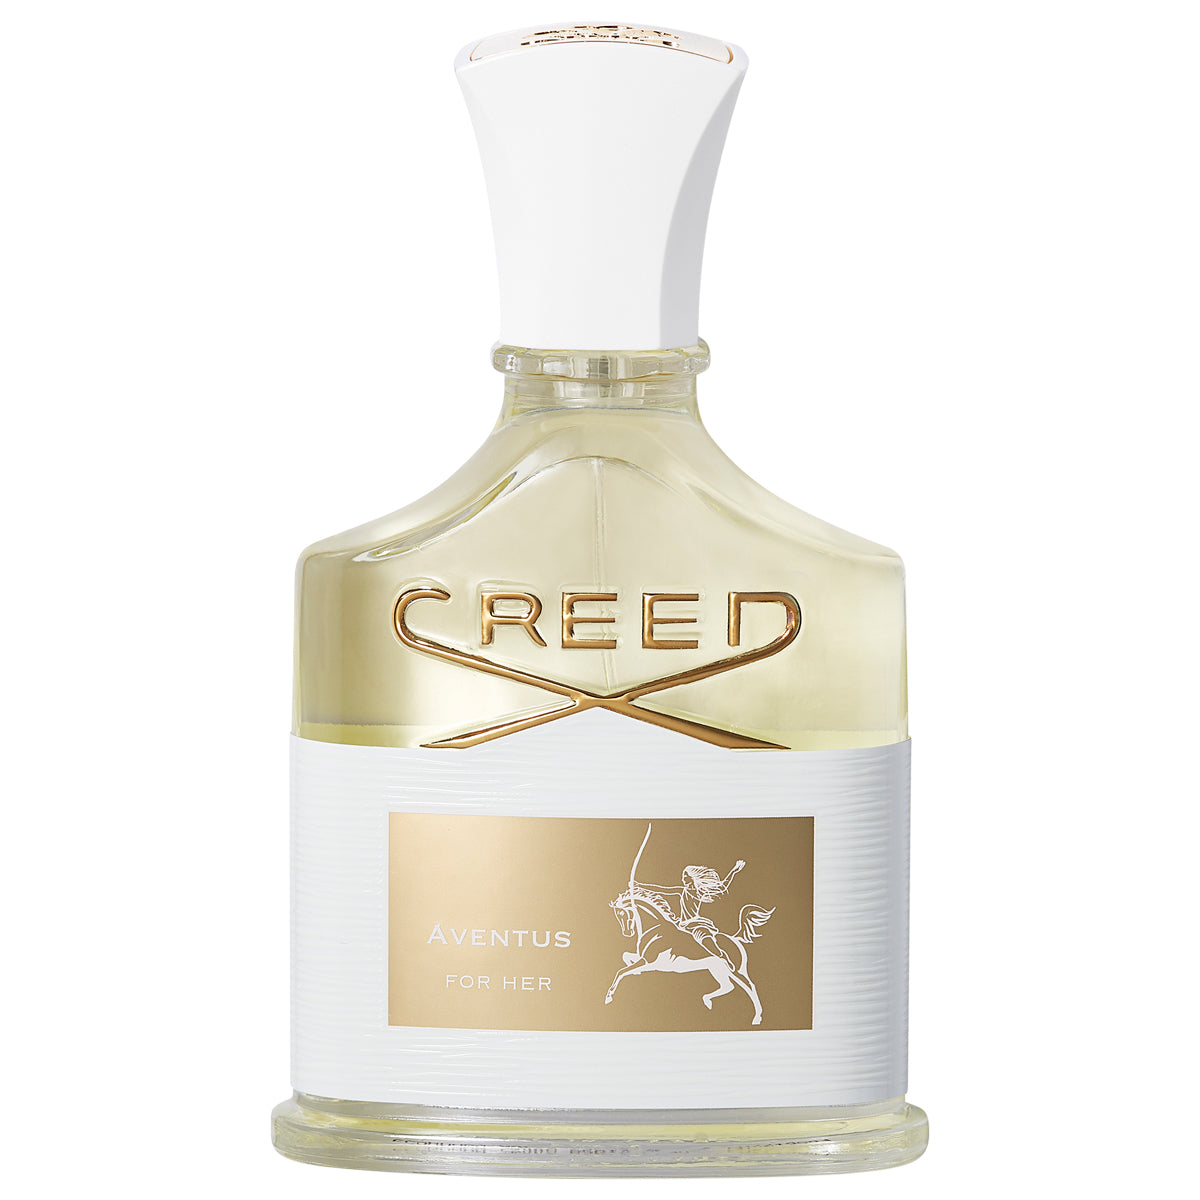 Creed Creed Aventus for her 75 ML